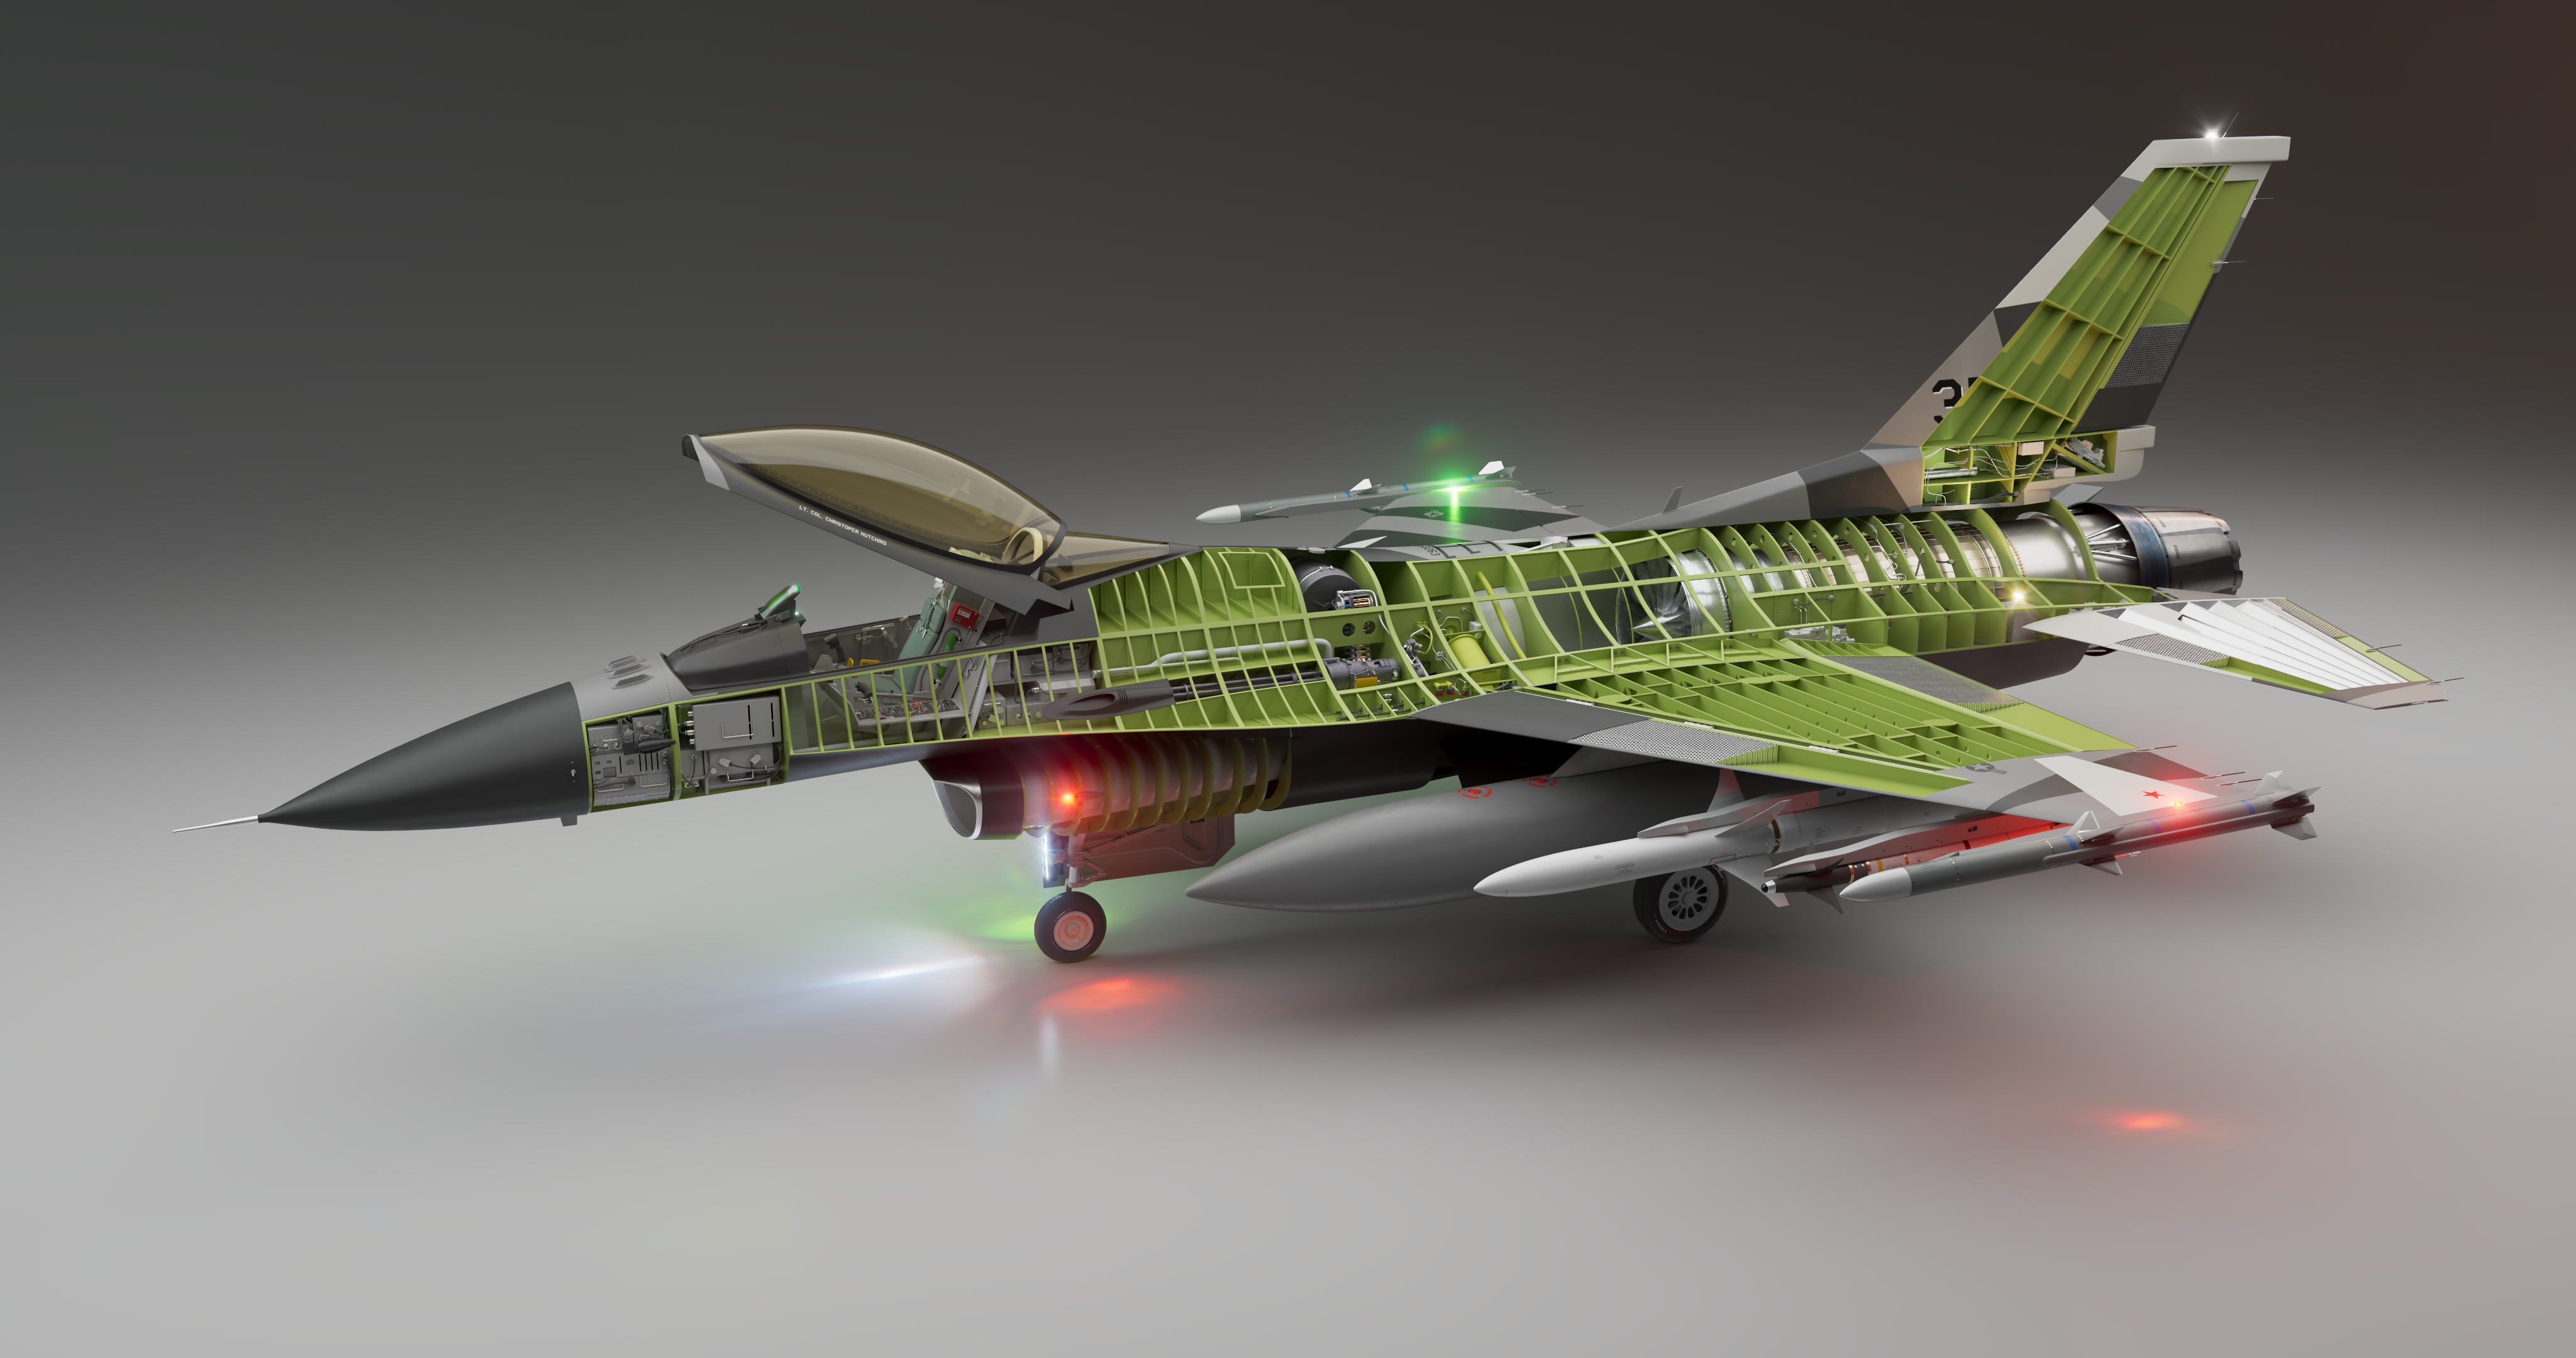 A 3D cutaway of an F-16 Fighting Falcon showing its internal structure and components